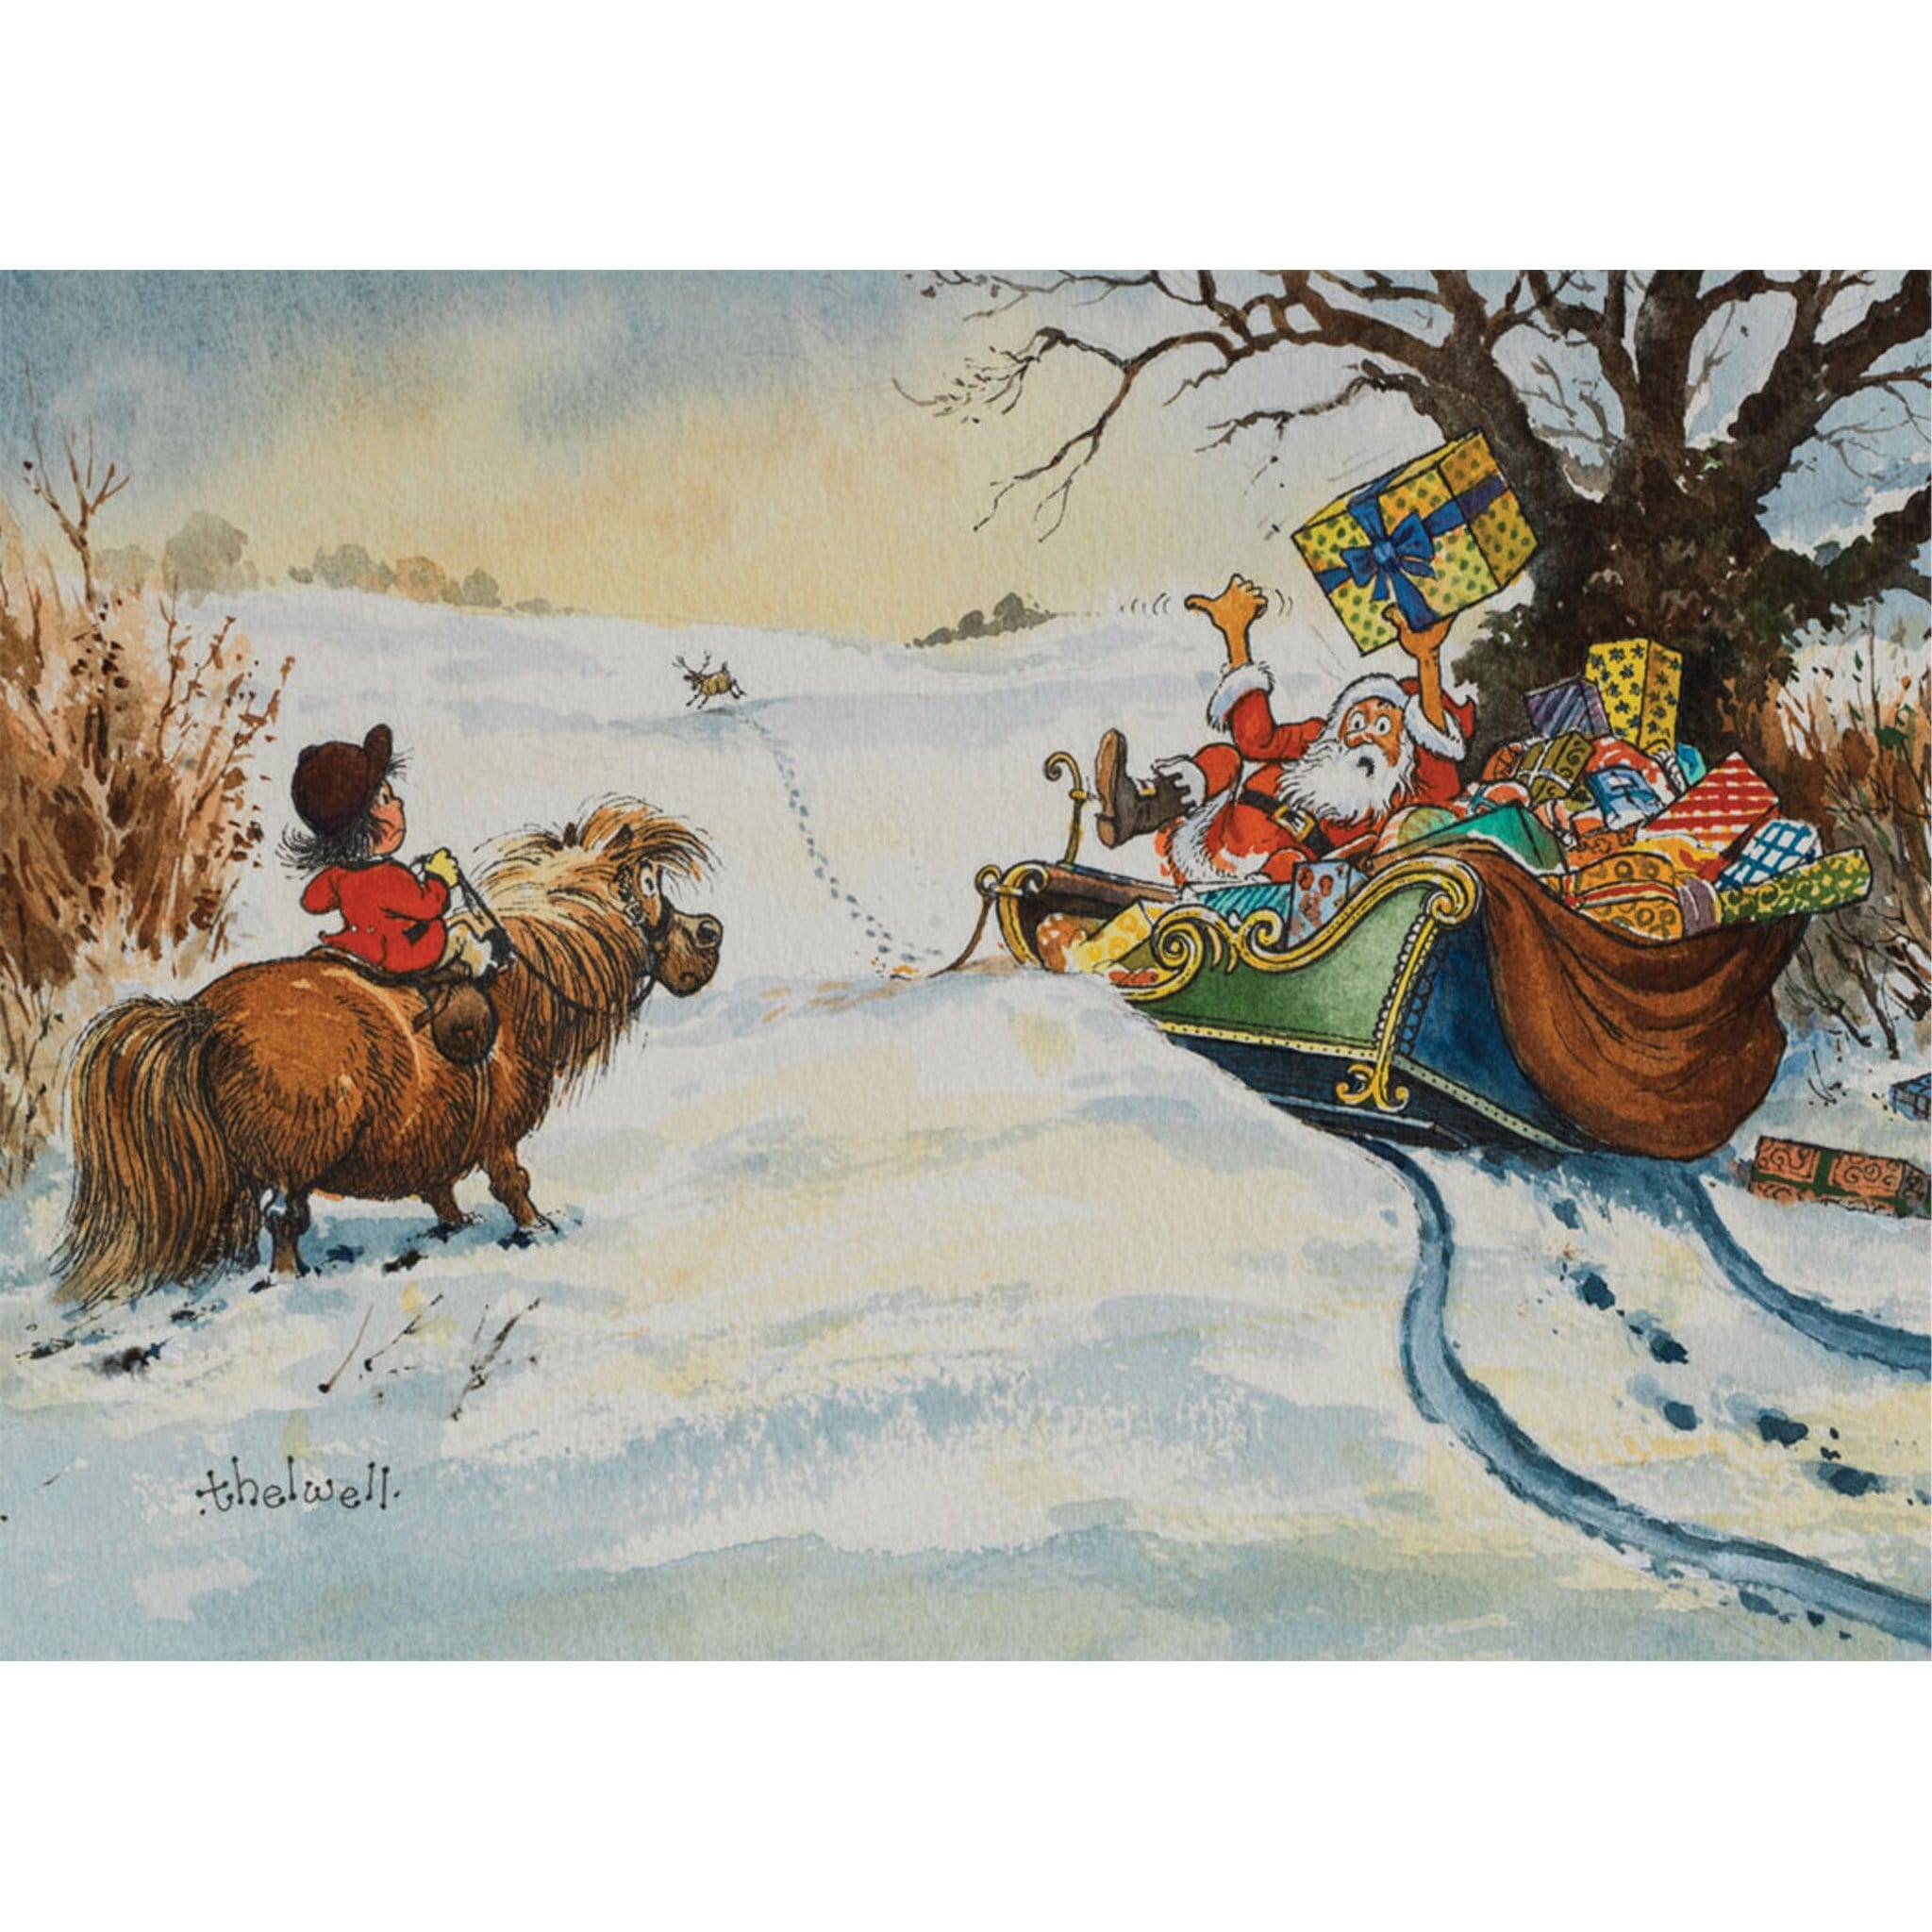 Thelwell Hitchhiker Christmas Card THELXMAS004